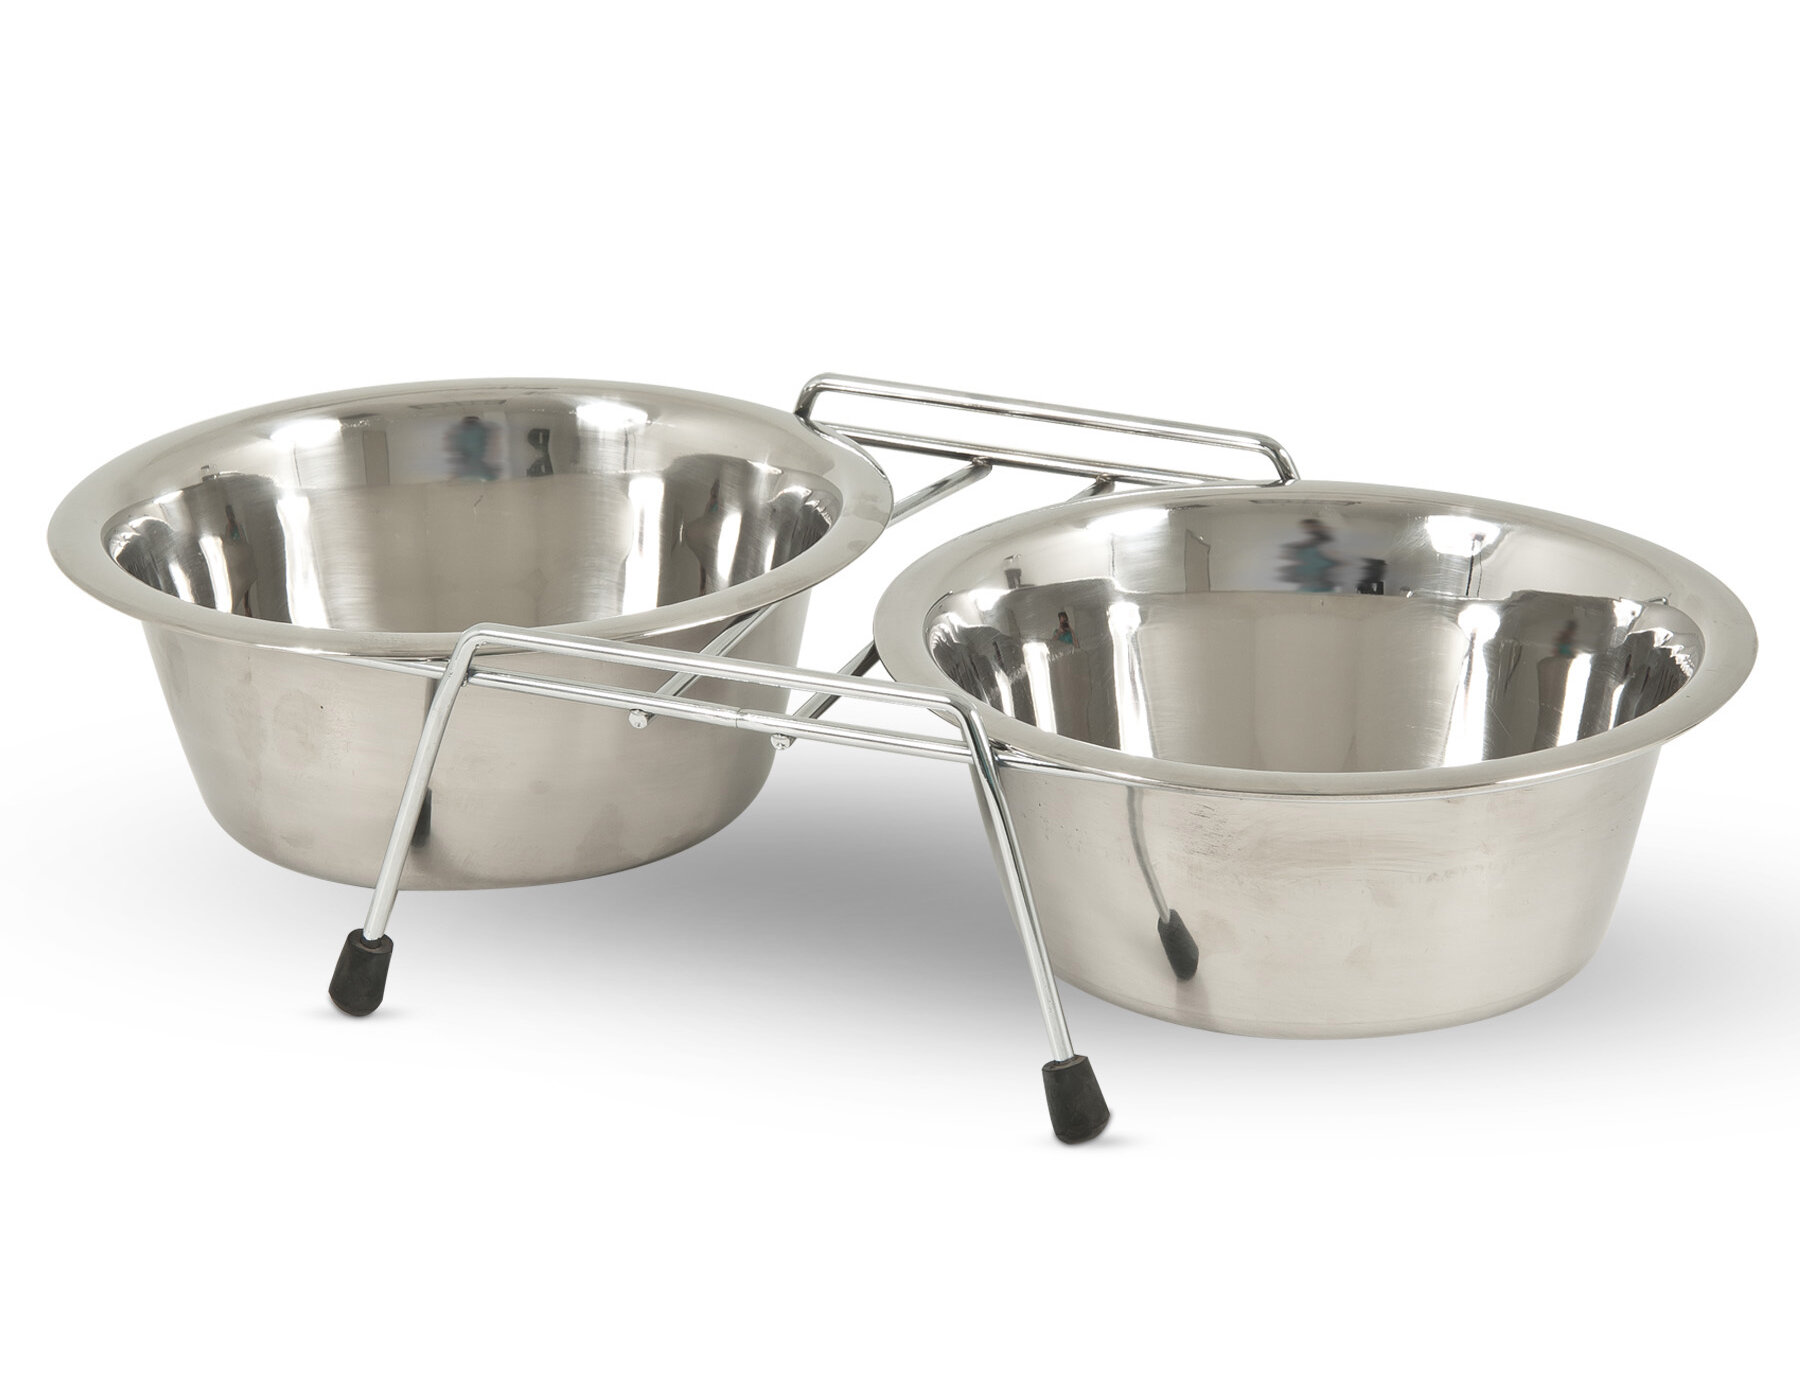 WHIPPY Stainless Steel Dog Bowl for Small,Medium and Large Pets Set of 2 